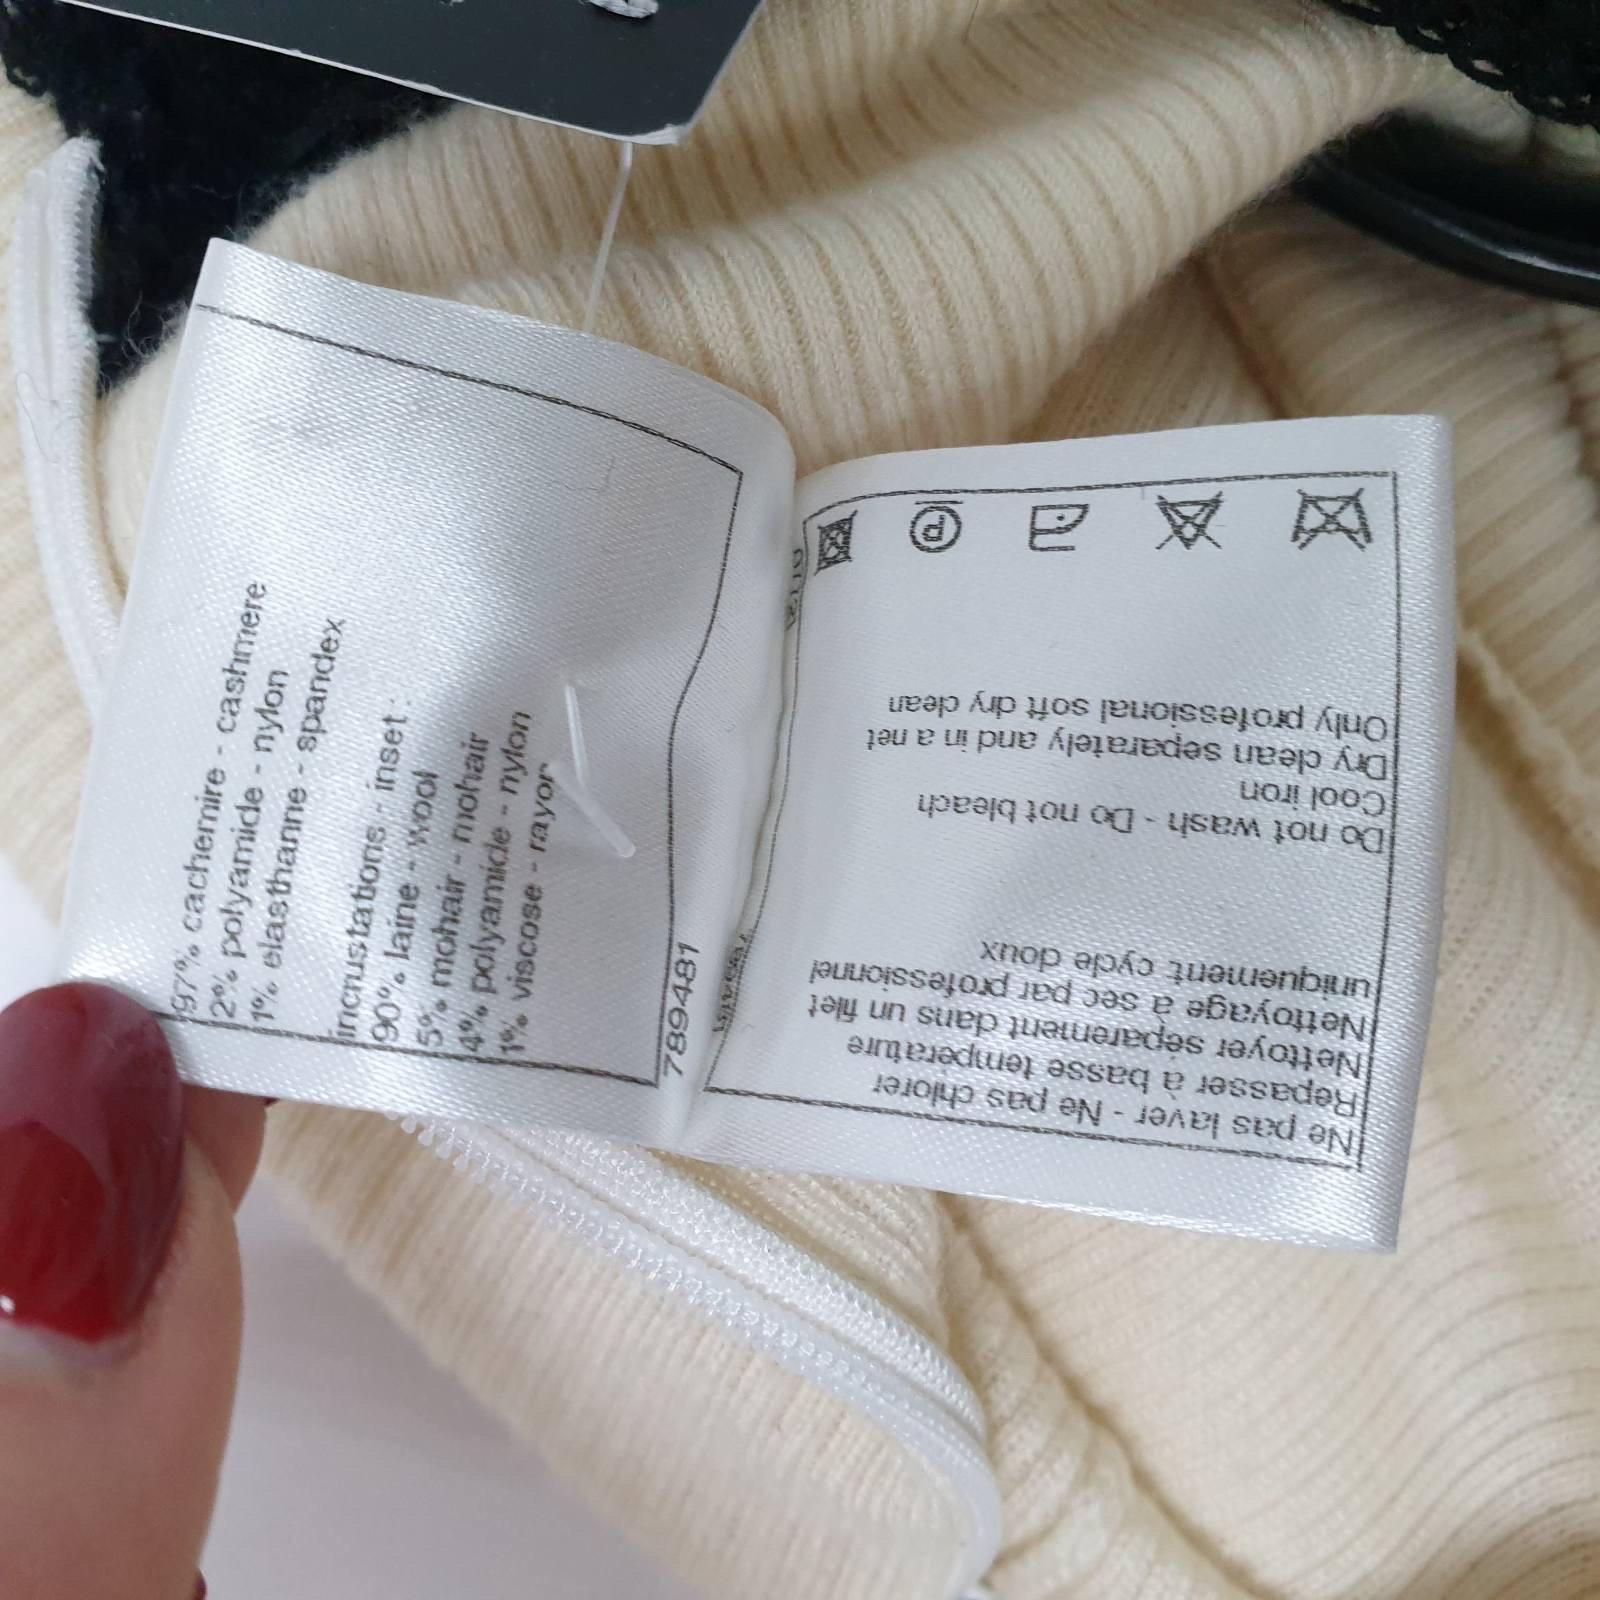 Chanel Wite Black Cashmere Turtleneck Sweater In Good Condition For Sale In Krakow, PL